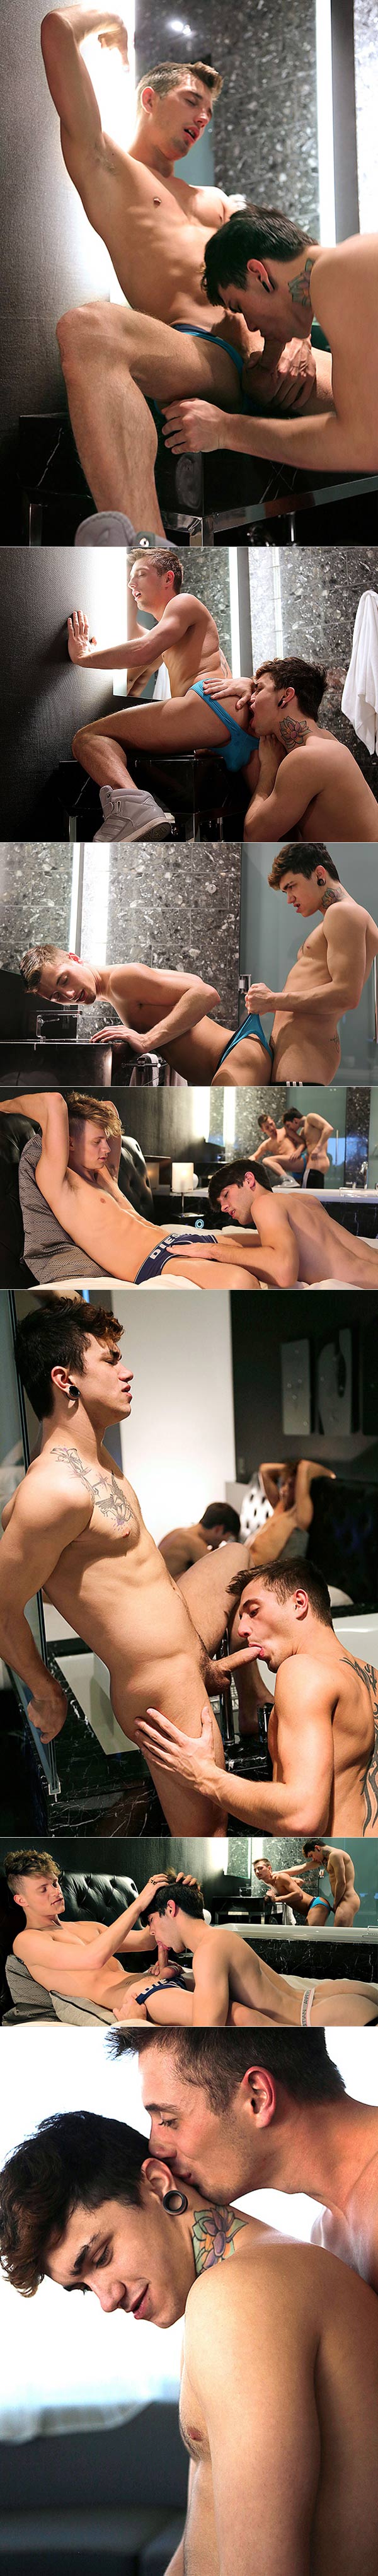 Max & Jake's ROADSTRIP: Episode III (THE BANGOVER featuring JD Phoenix & Aiden Summers) at CockyBoys.com